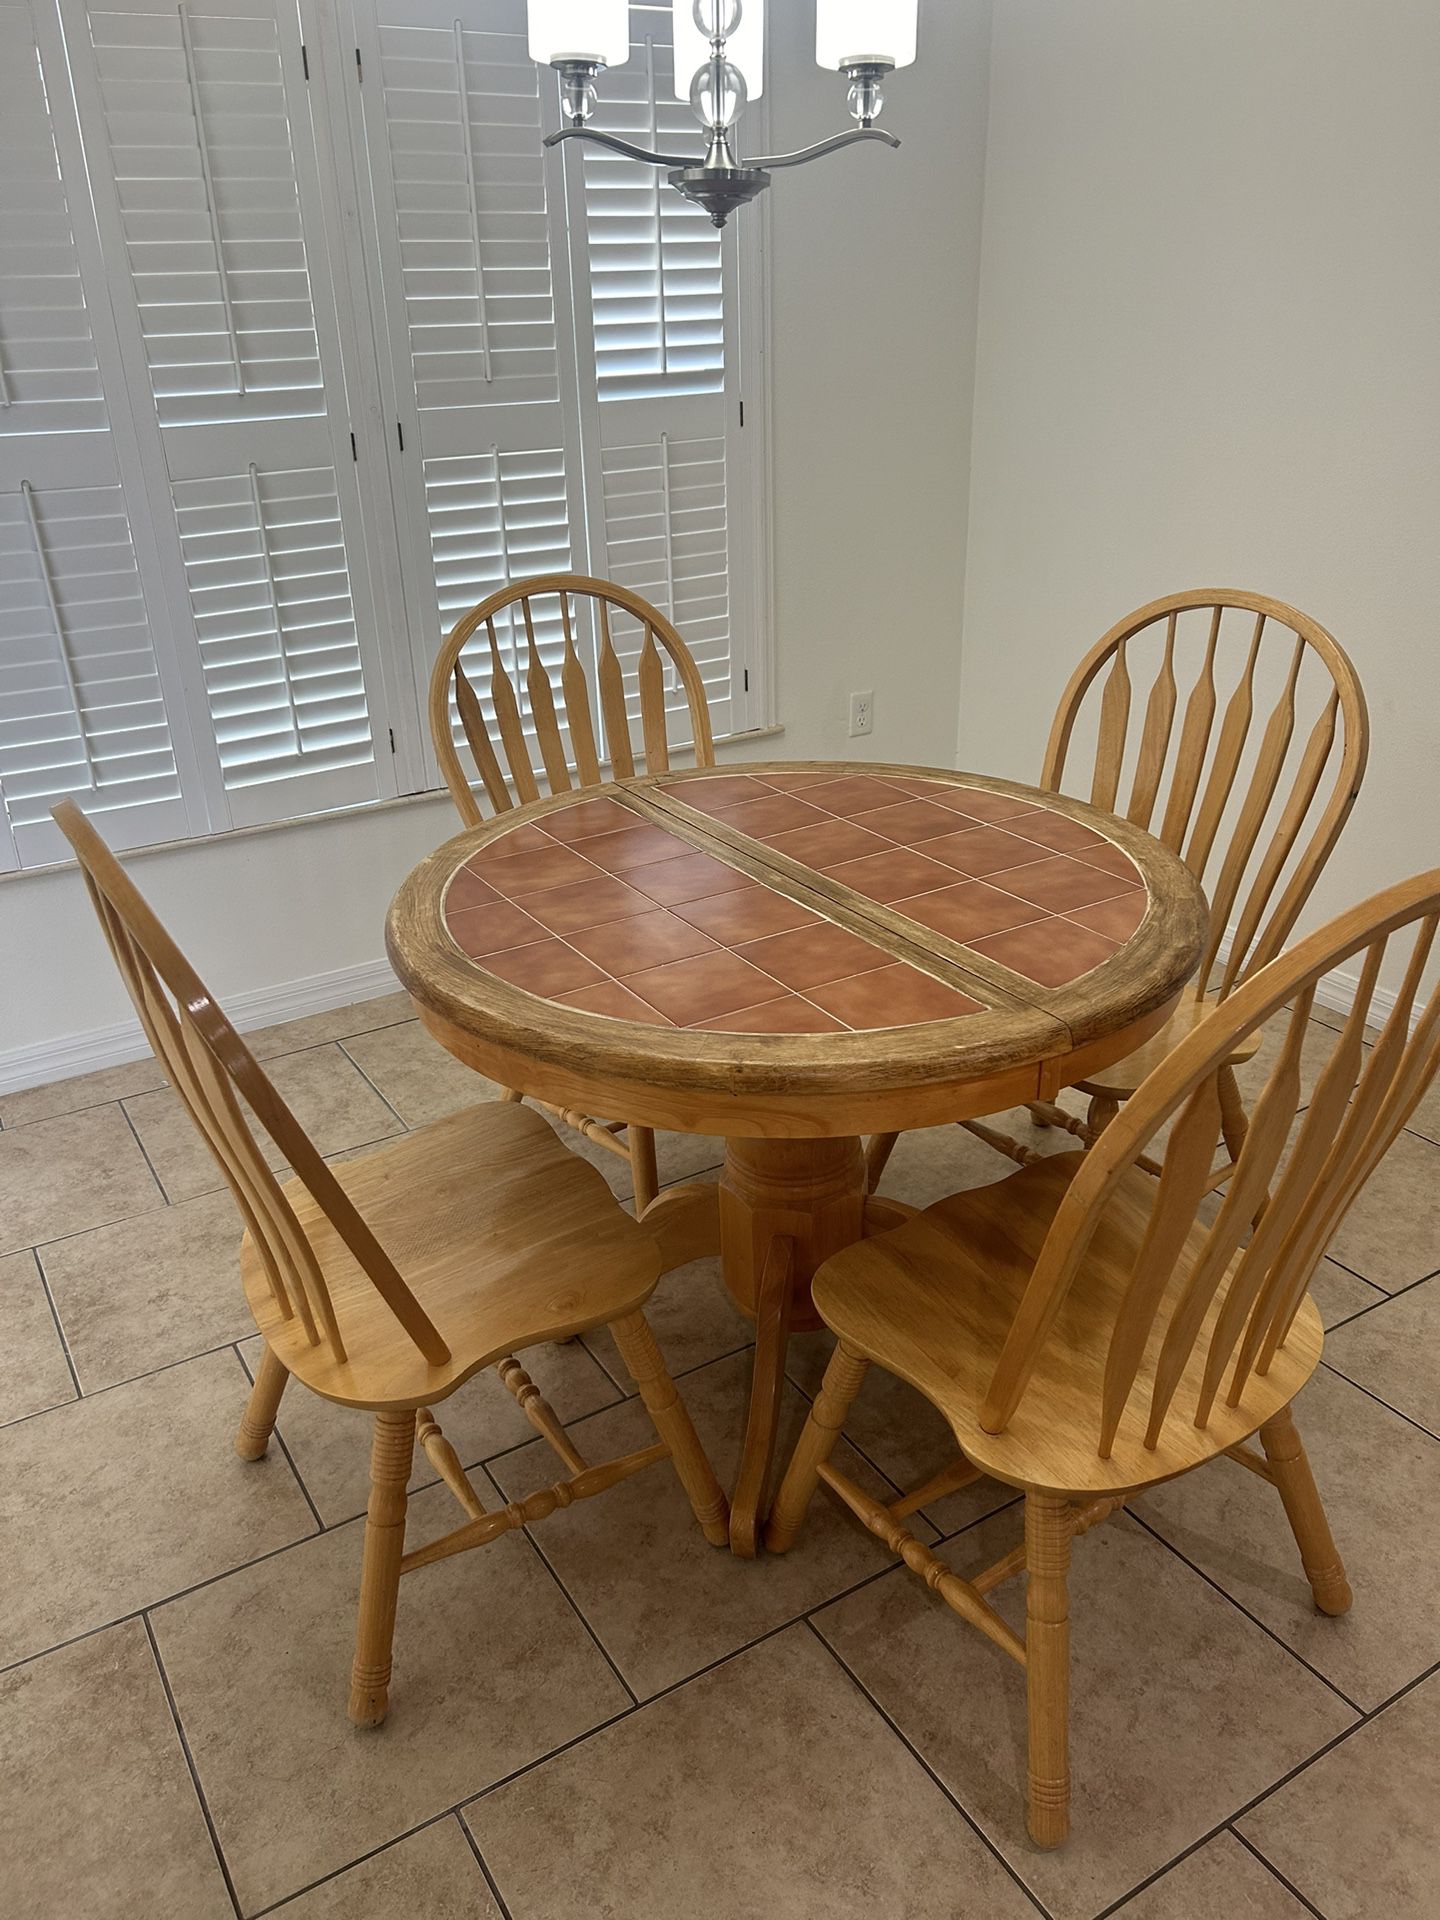 Wooden Tiled Kitchen Table Free With Chairs